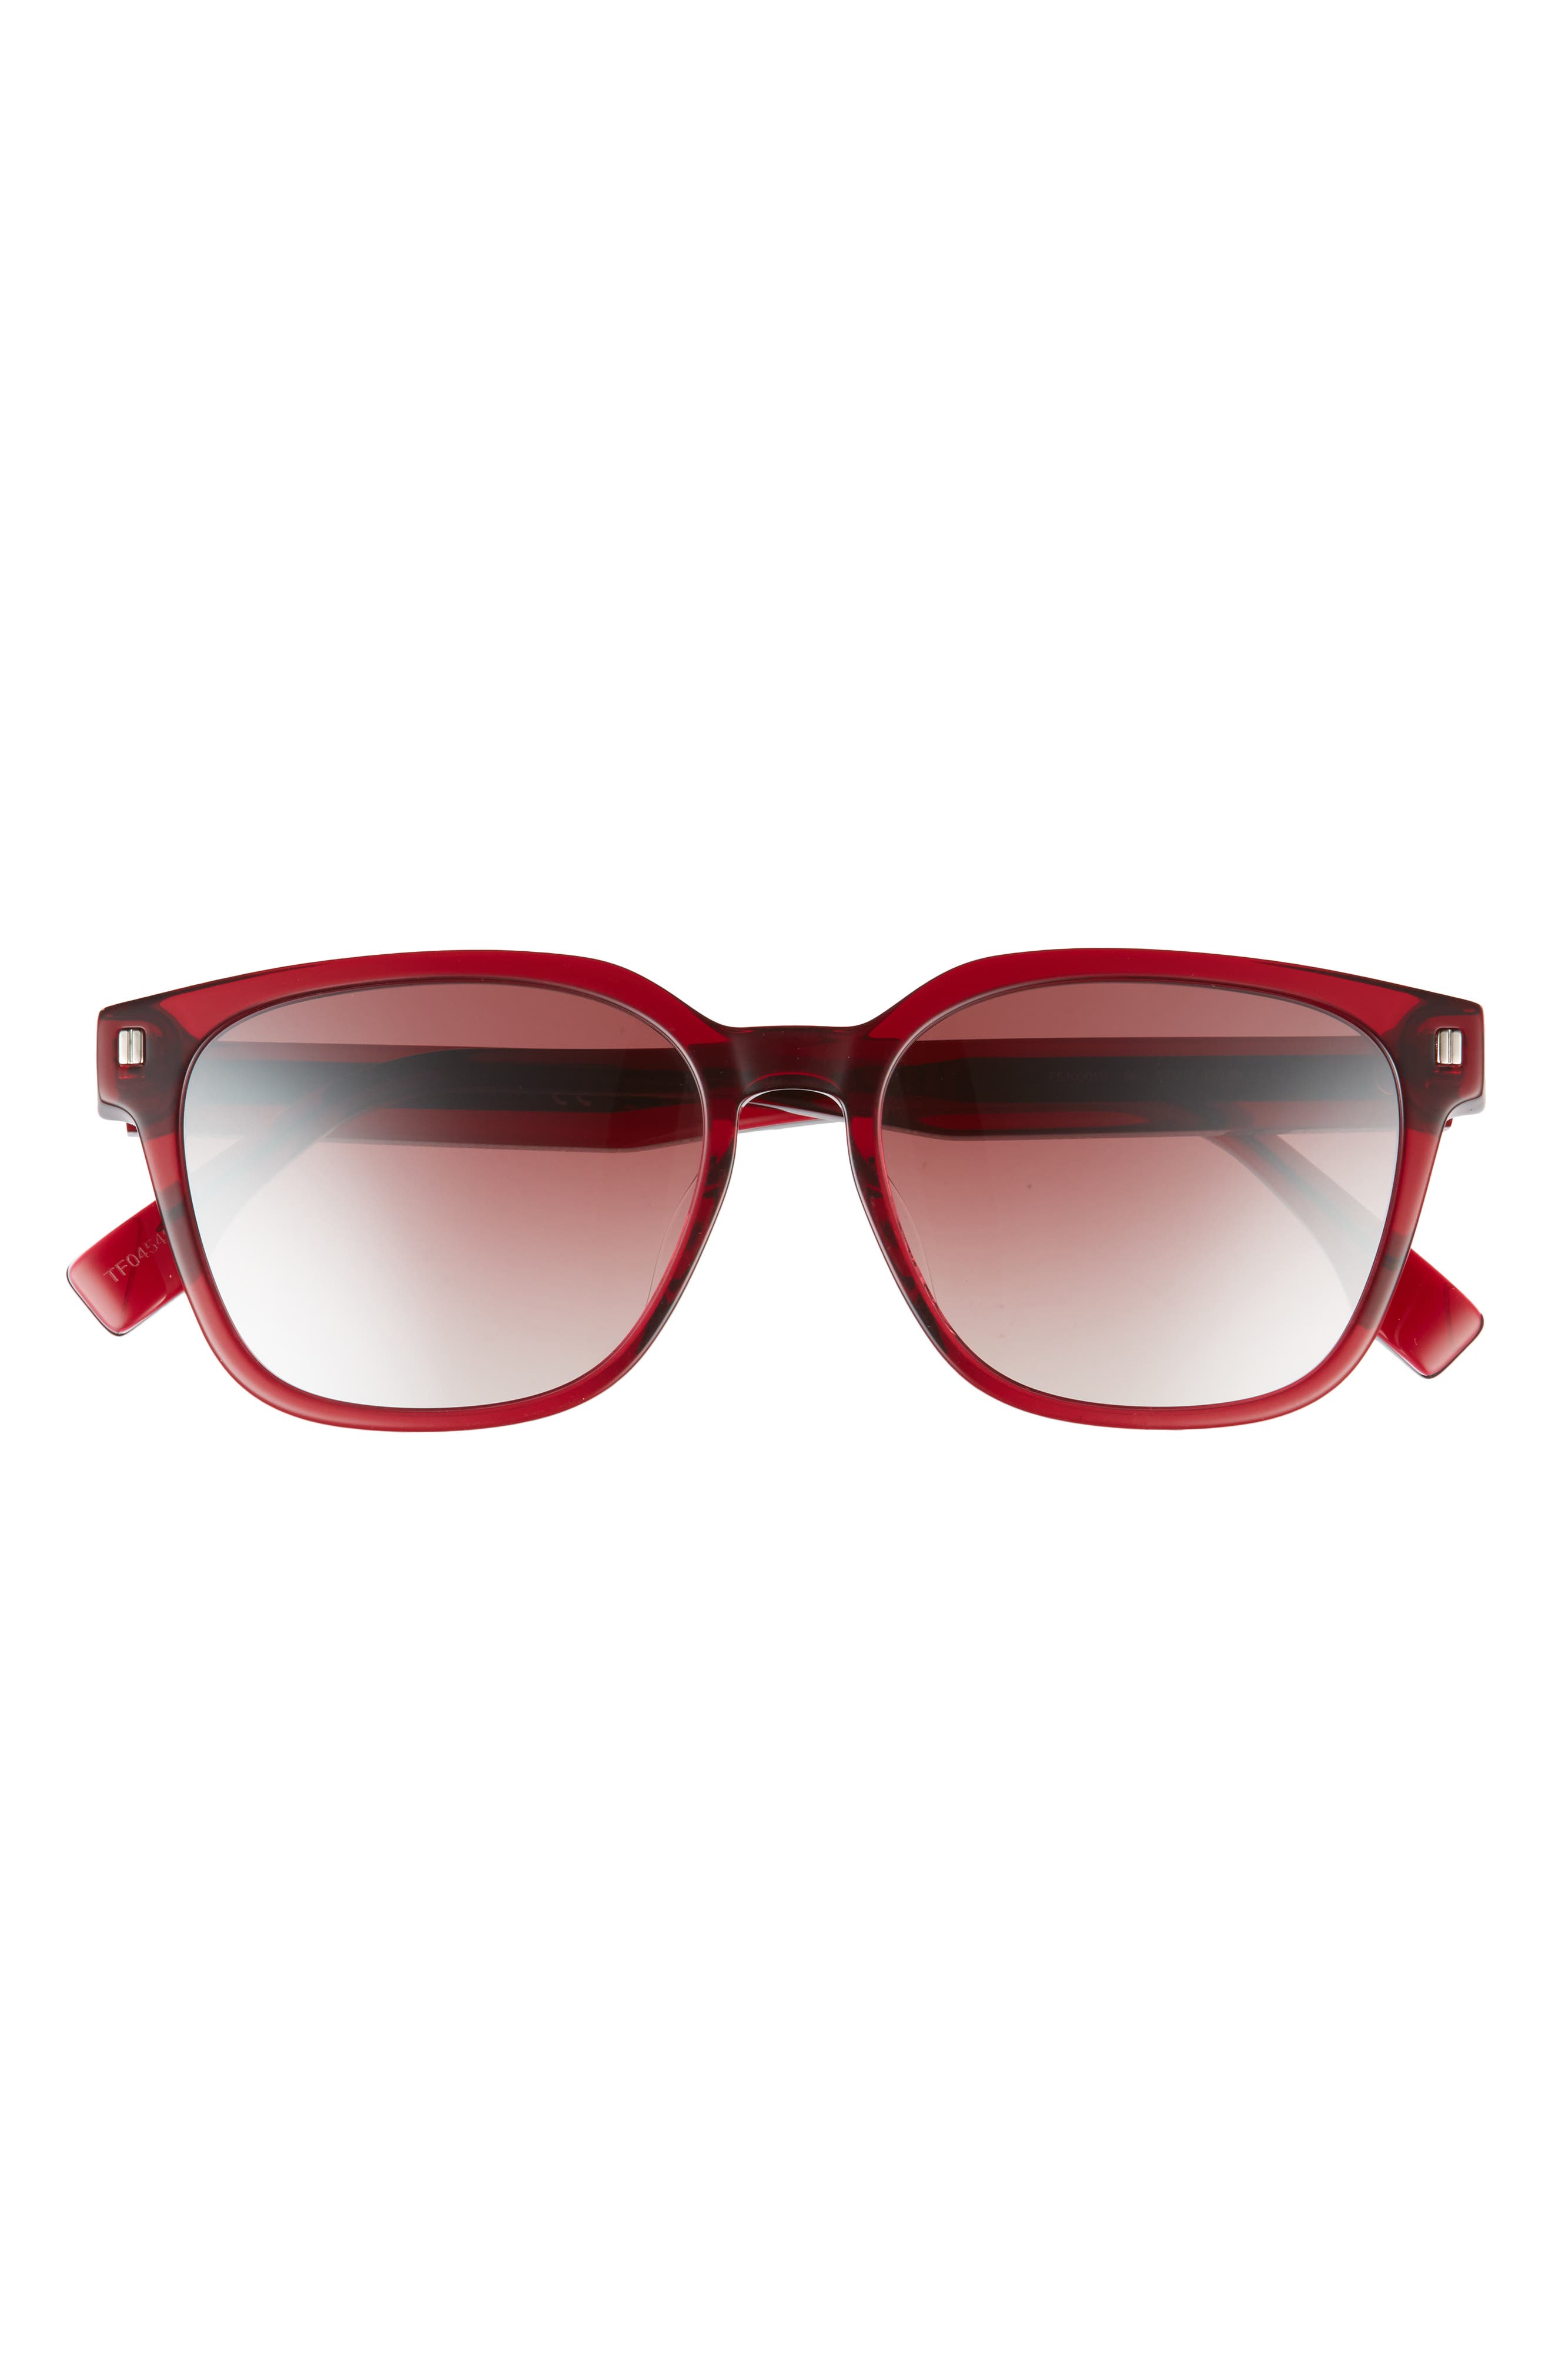 Fendi 55mm Square Sunglasses in Shiny Red /Bordeaux Mirror at Nordstrom